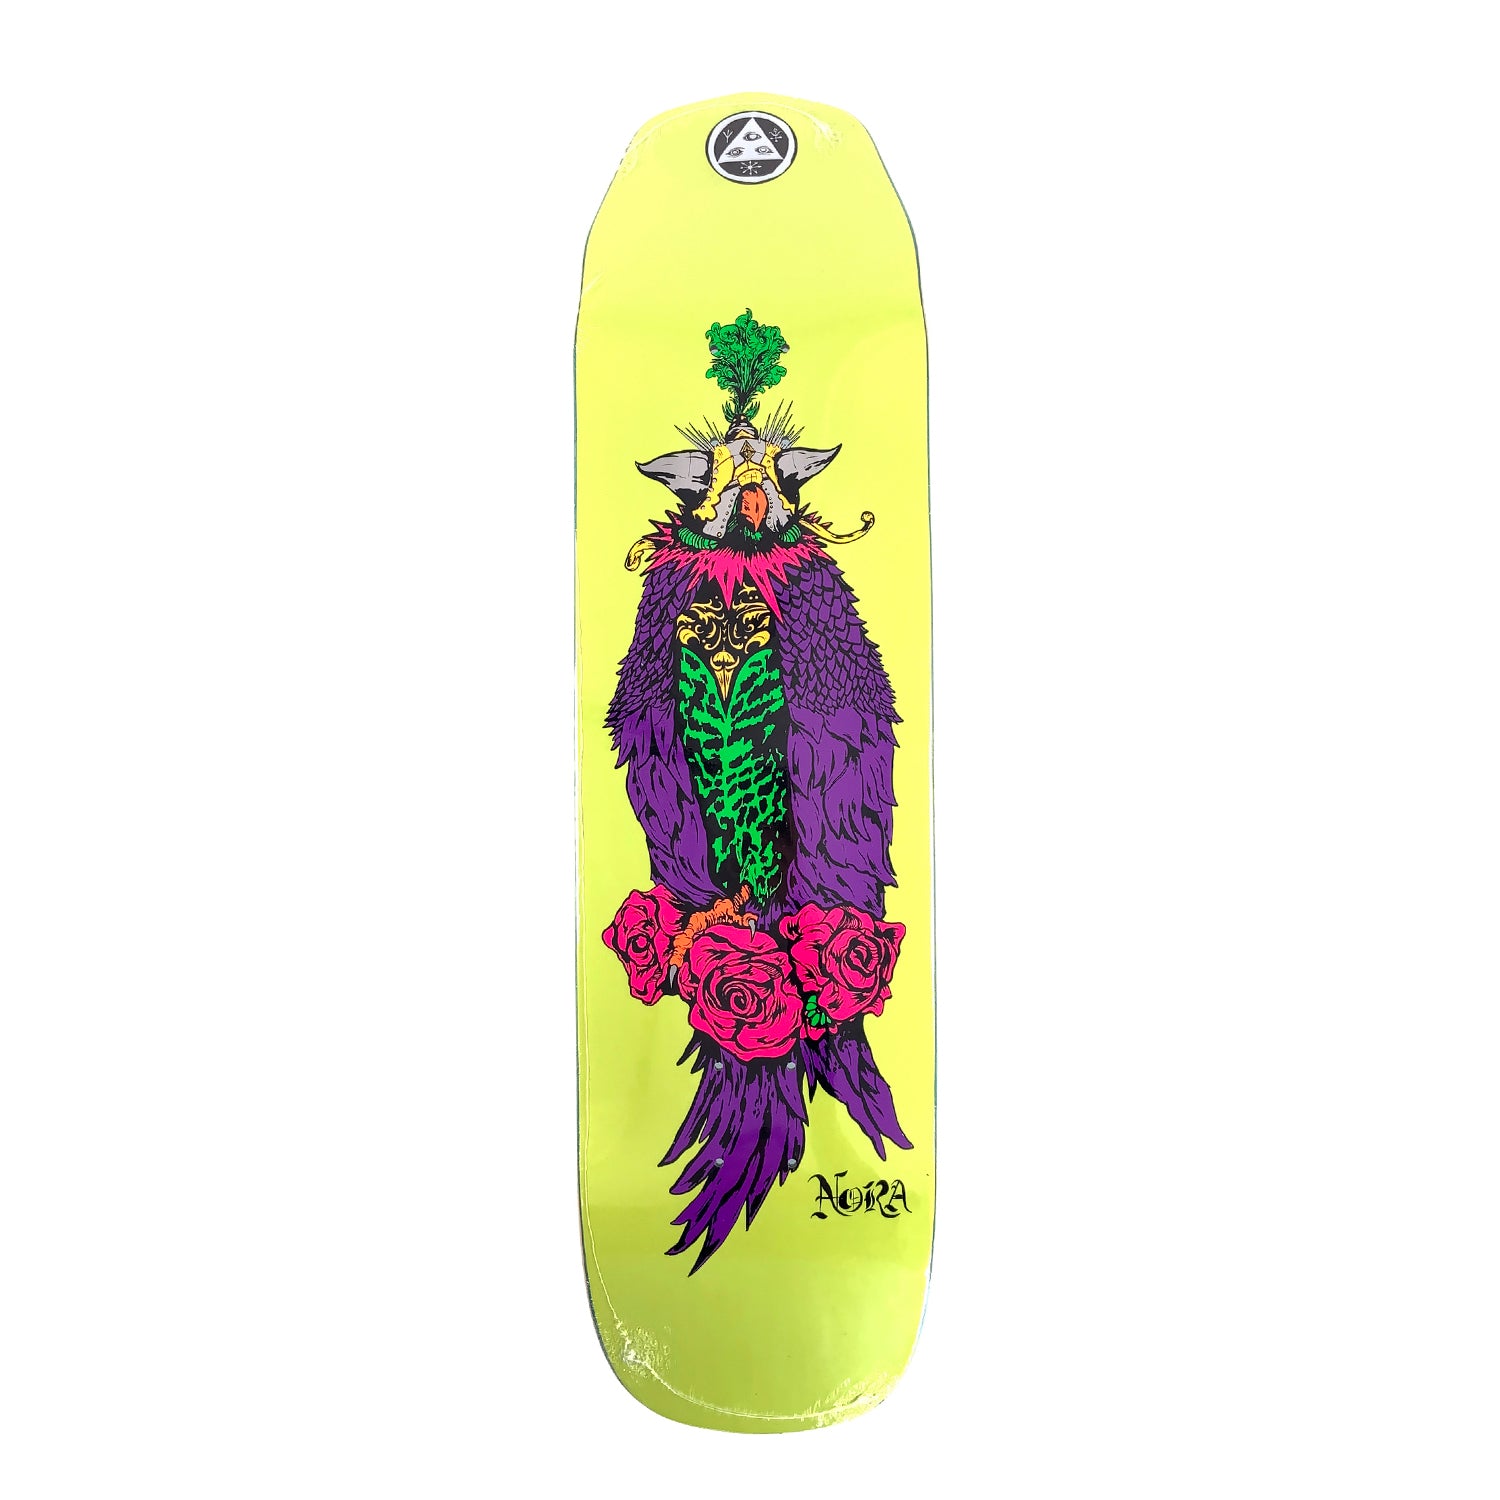 Welcome - 8.125" - Nora Vasconcellos Peregrine on Wicked Princess - Neon Yellow - Prime Delux Store